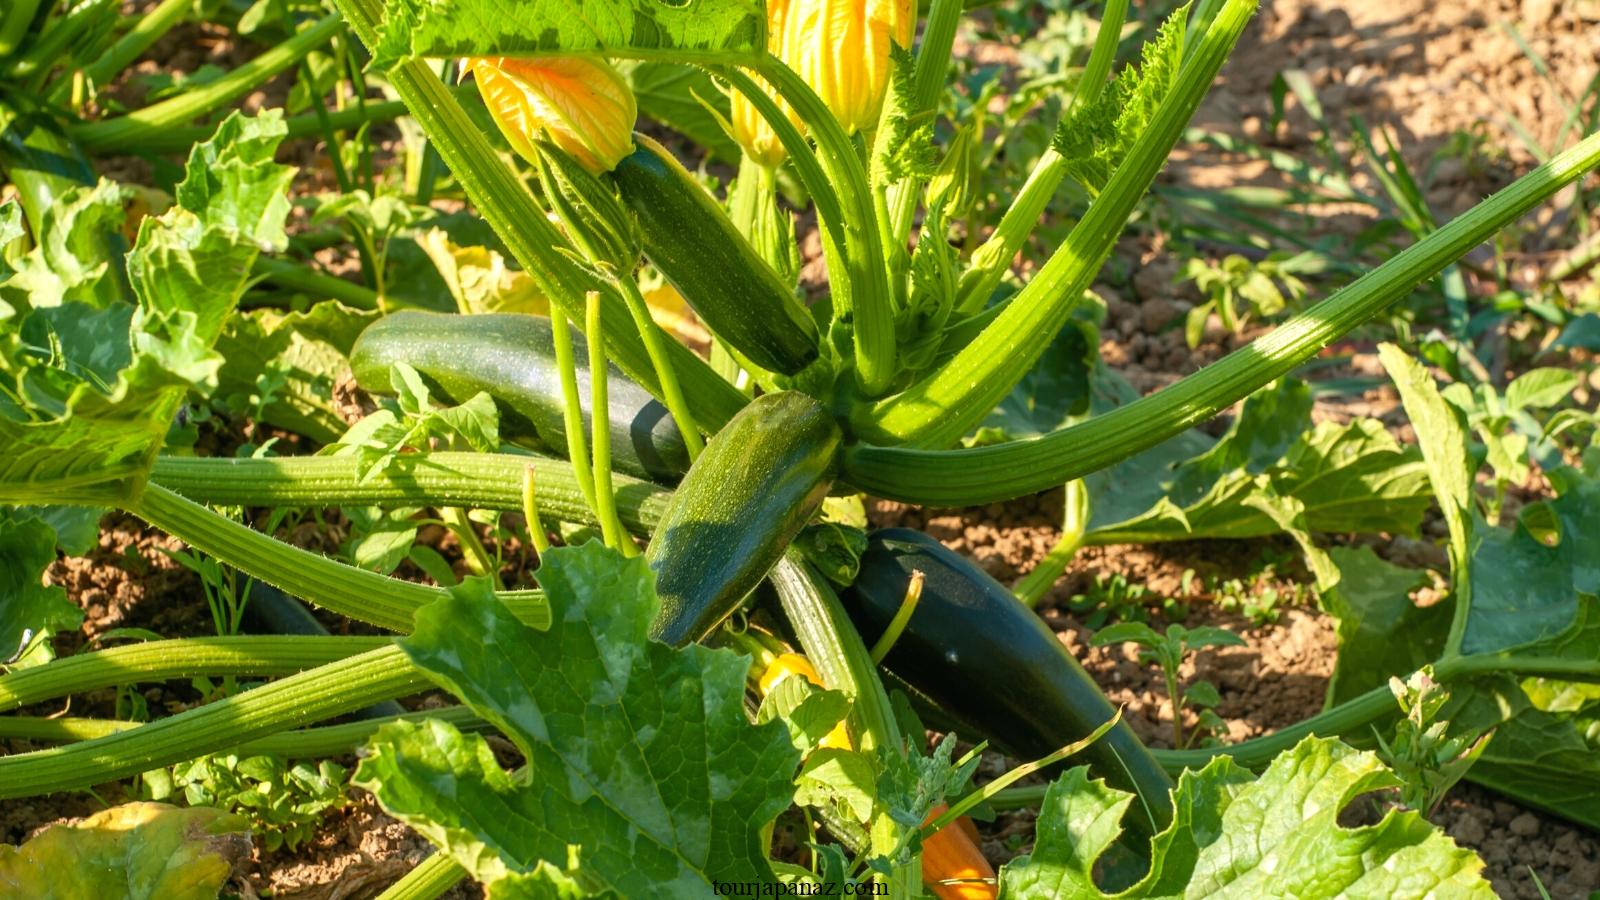 Zucchini Growth Stages: How Fast Does Zucchini Grow? 5